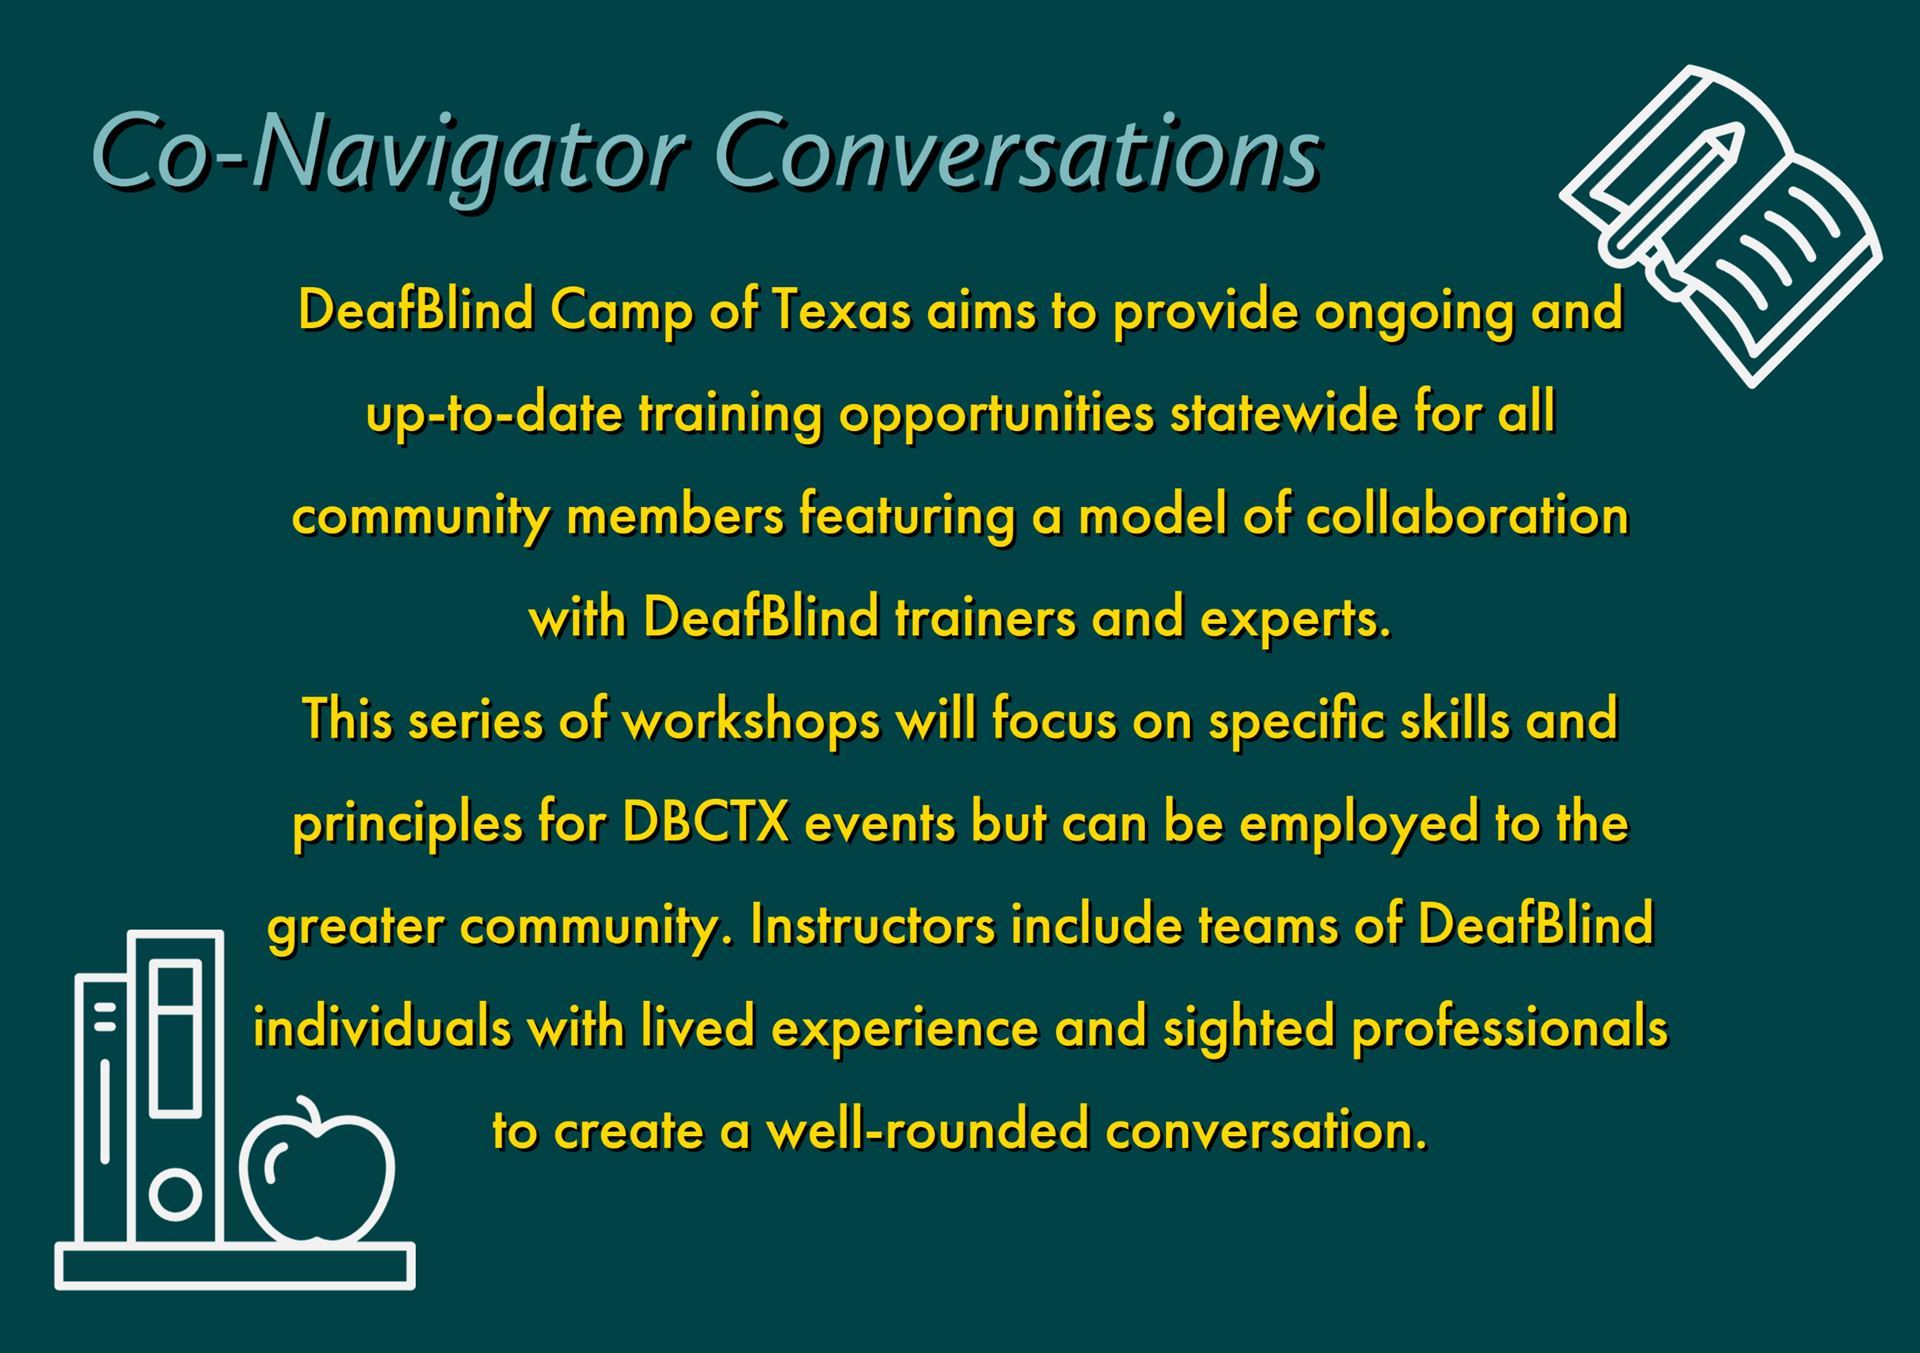 DeafBlind Camp of Texas aims to provide ongoing and up-to-date training opportunities statewide for all community members featuring a model of collaboration with DeafBlind trainers and experts. This series of workshops will focus on specific skills and principles for DBCTX events but can be employed to the greater community. Instructors include teams of DeafBlind individuals with lived experience and sighted professionals to create a well-rounded conversation.